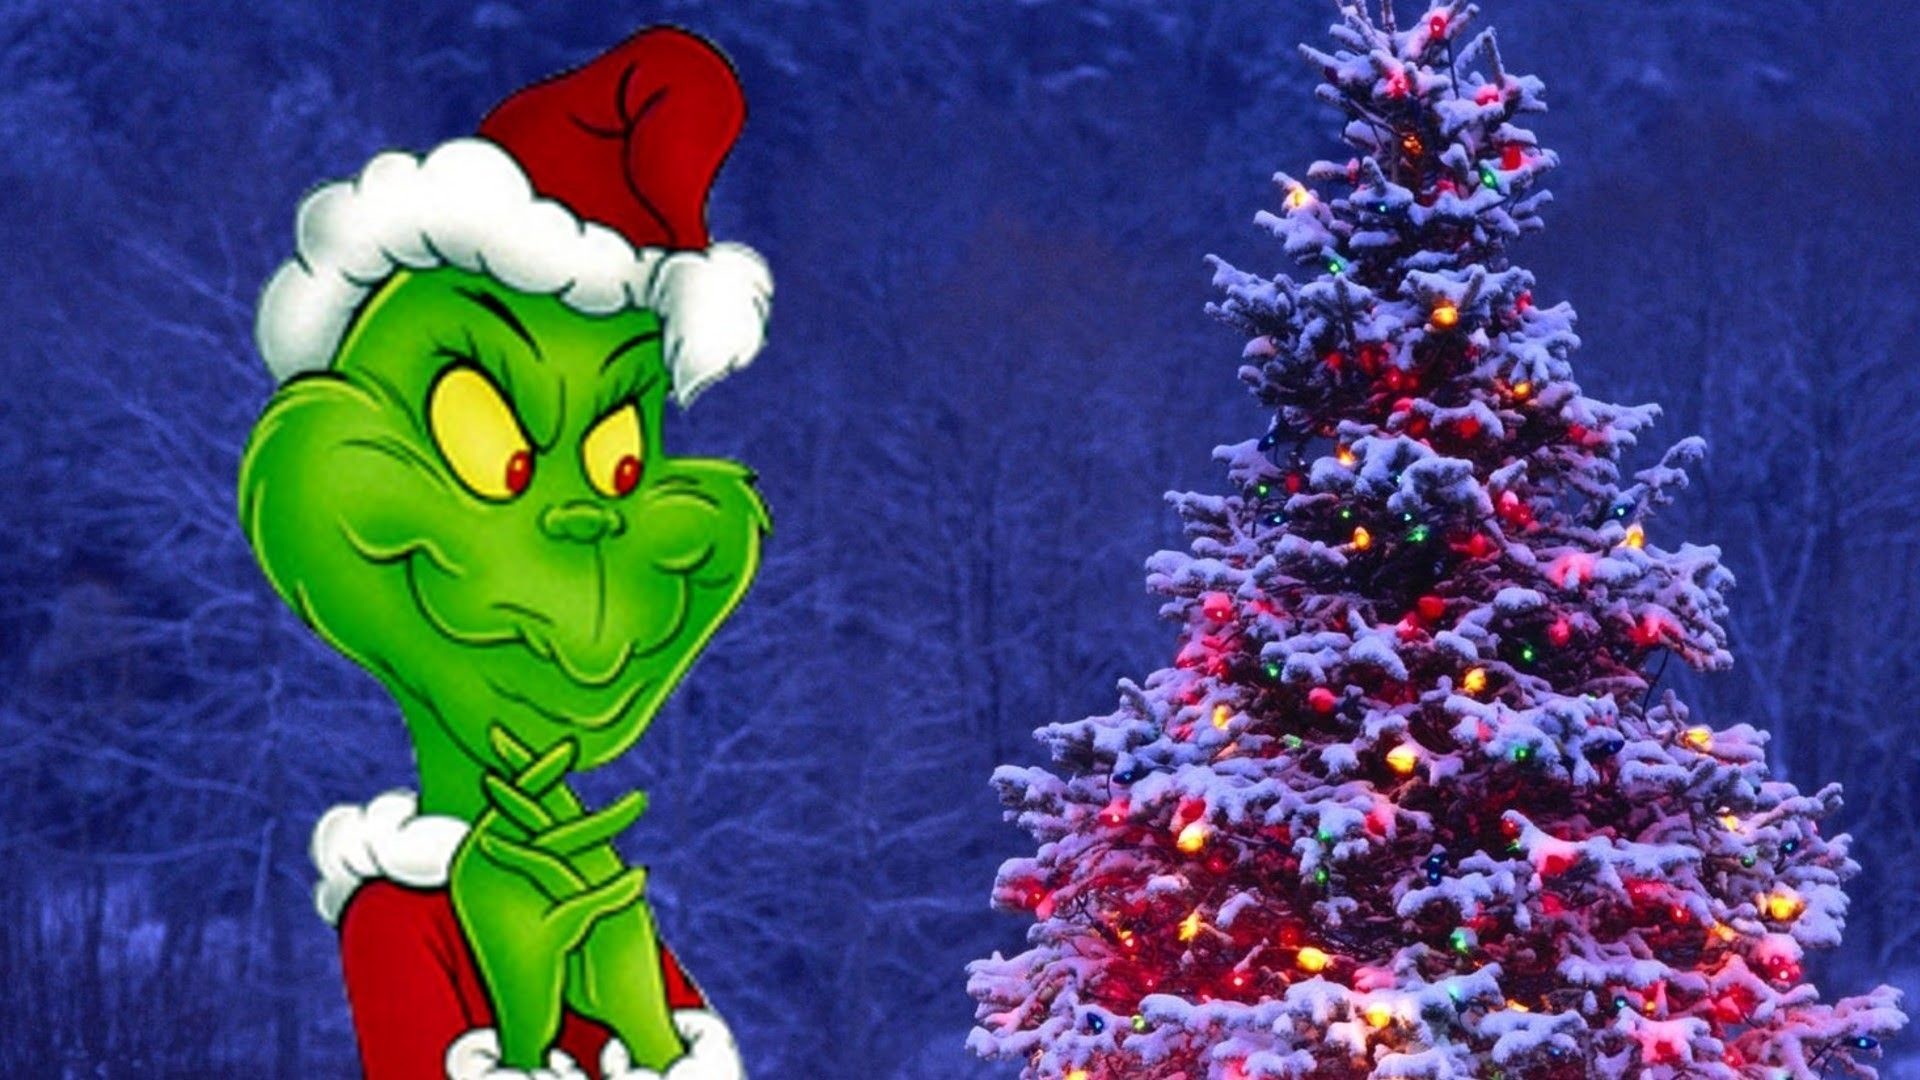 1920x1080 1192x670 How The Grinch Stole Christmas Wallpaper - Shared by S.....